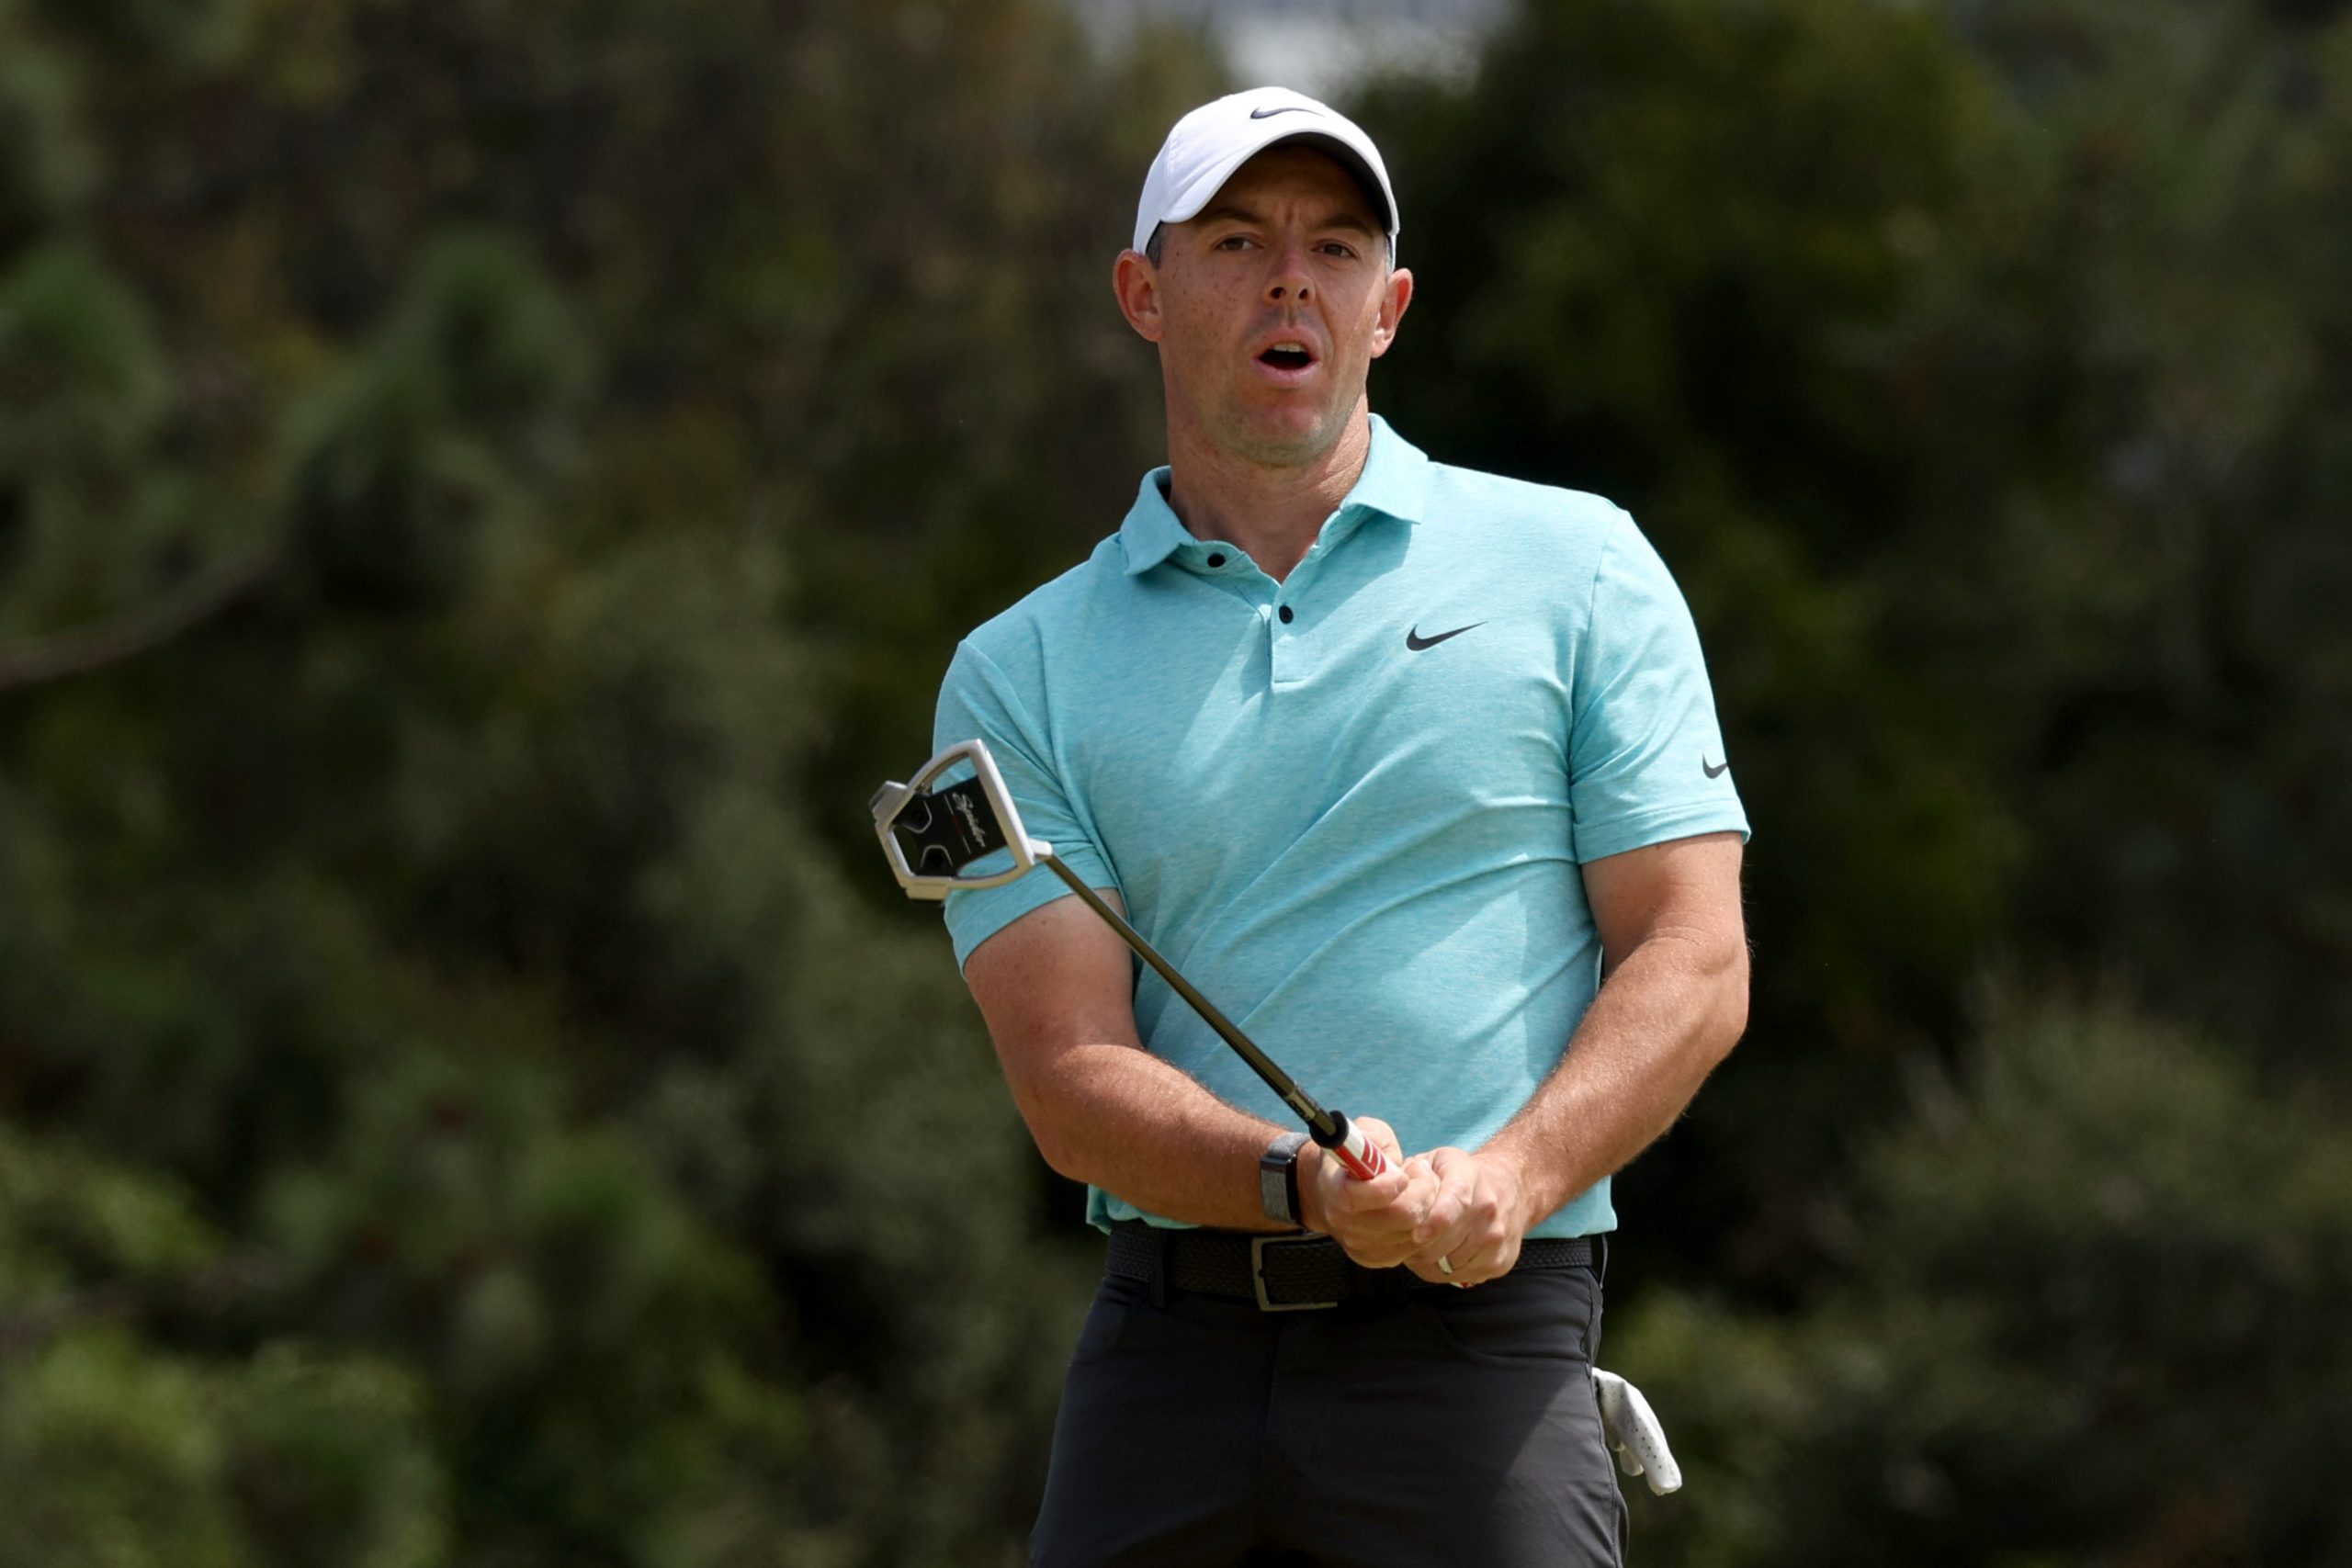 Rory McIlroy blows another Major opportunity as American Wyndham Clark wins the US Open after impressive final round